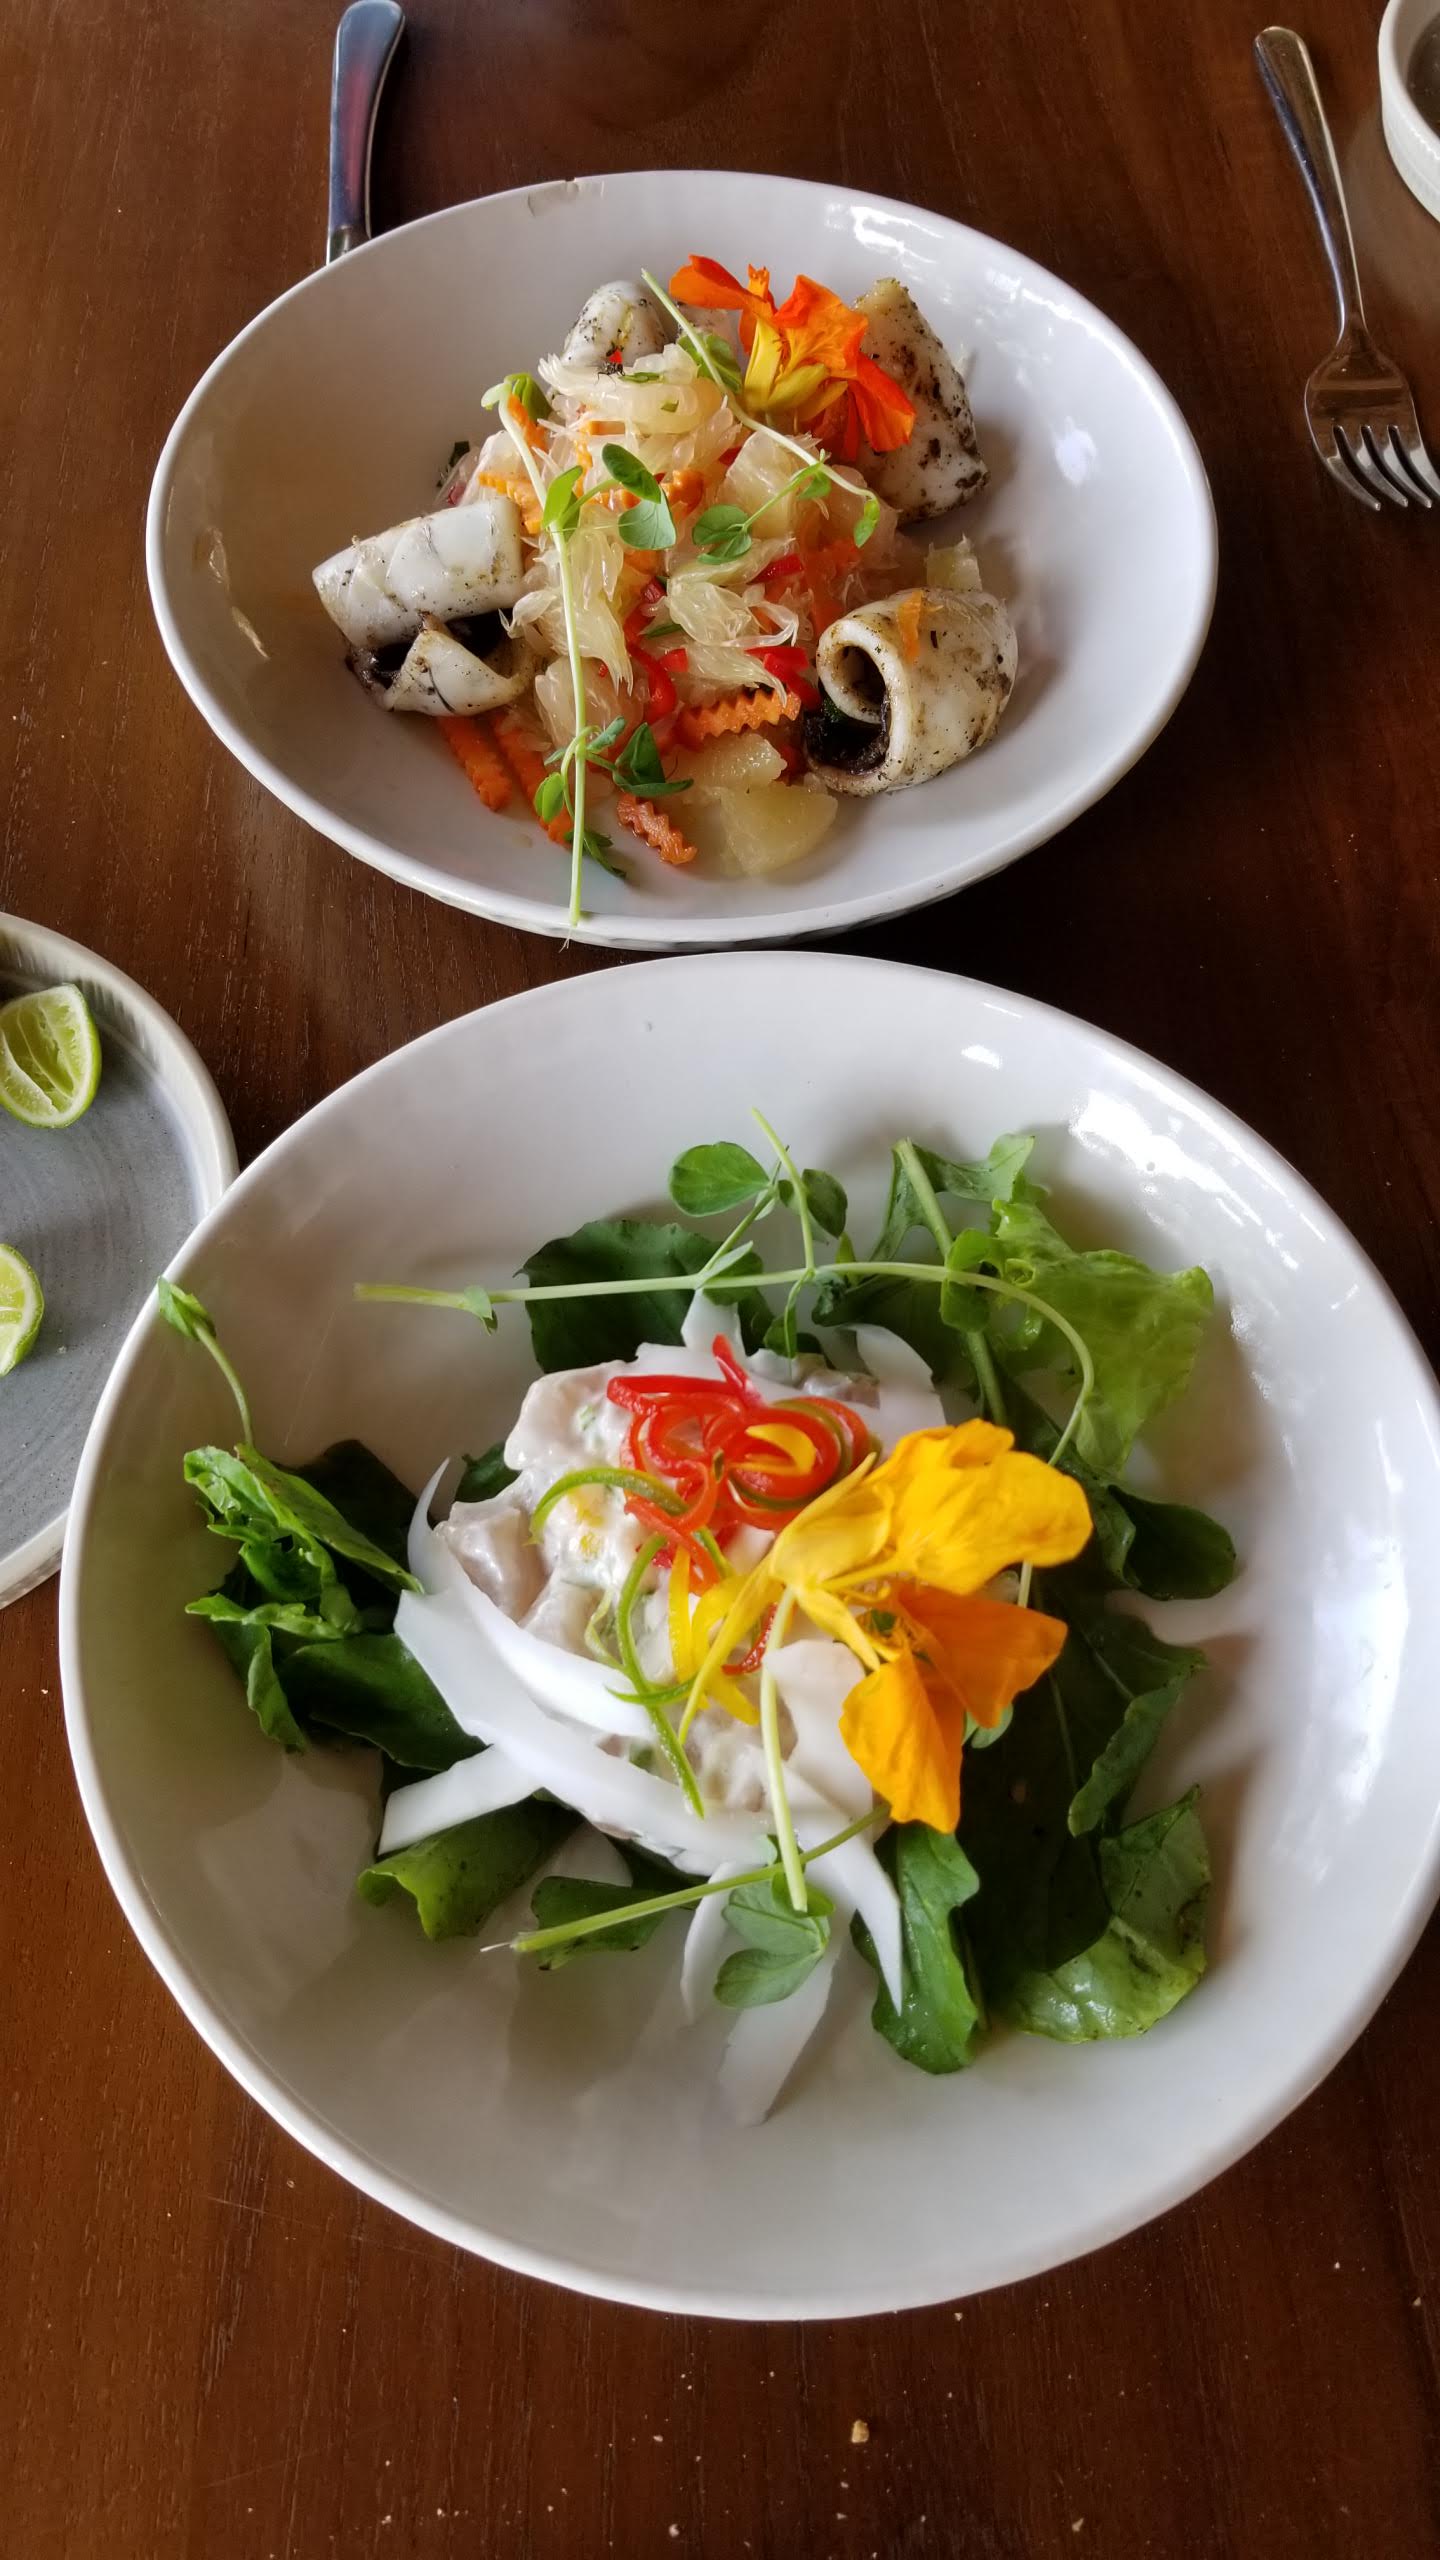 Squid salad and ceviche